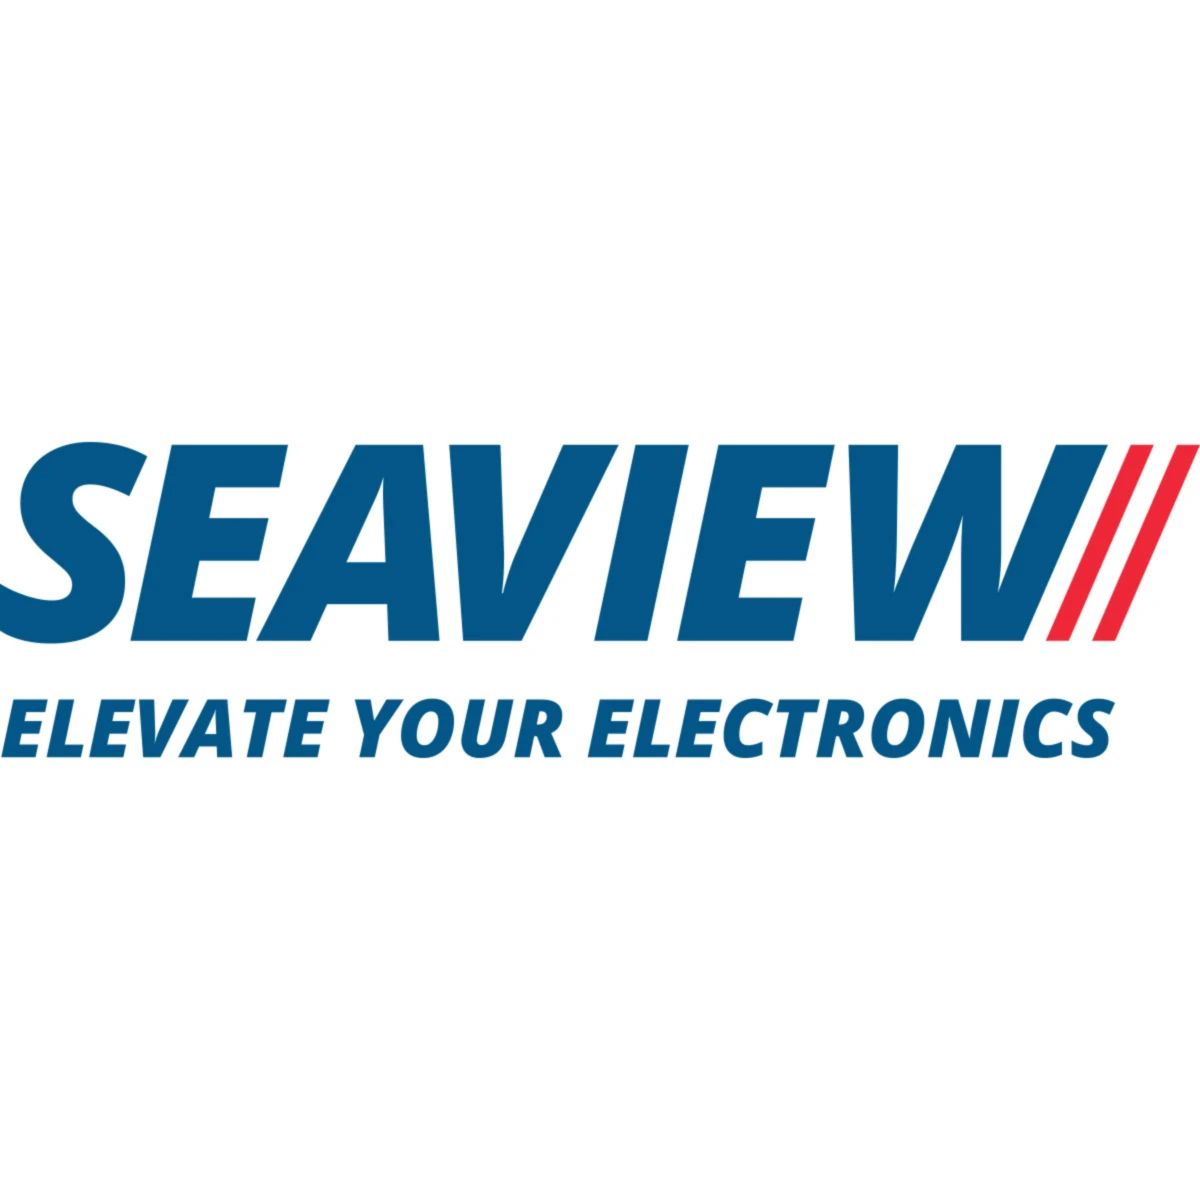 Seaview, Elevate your Electronics